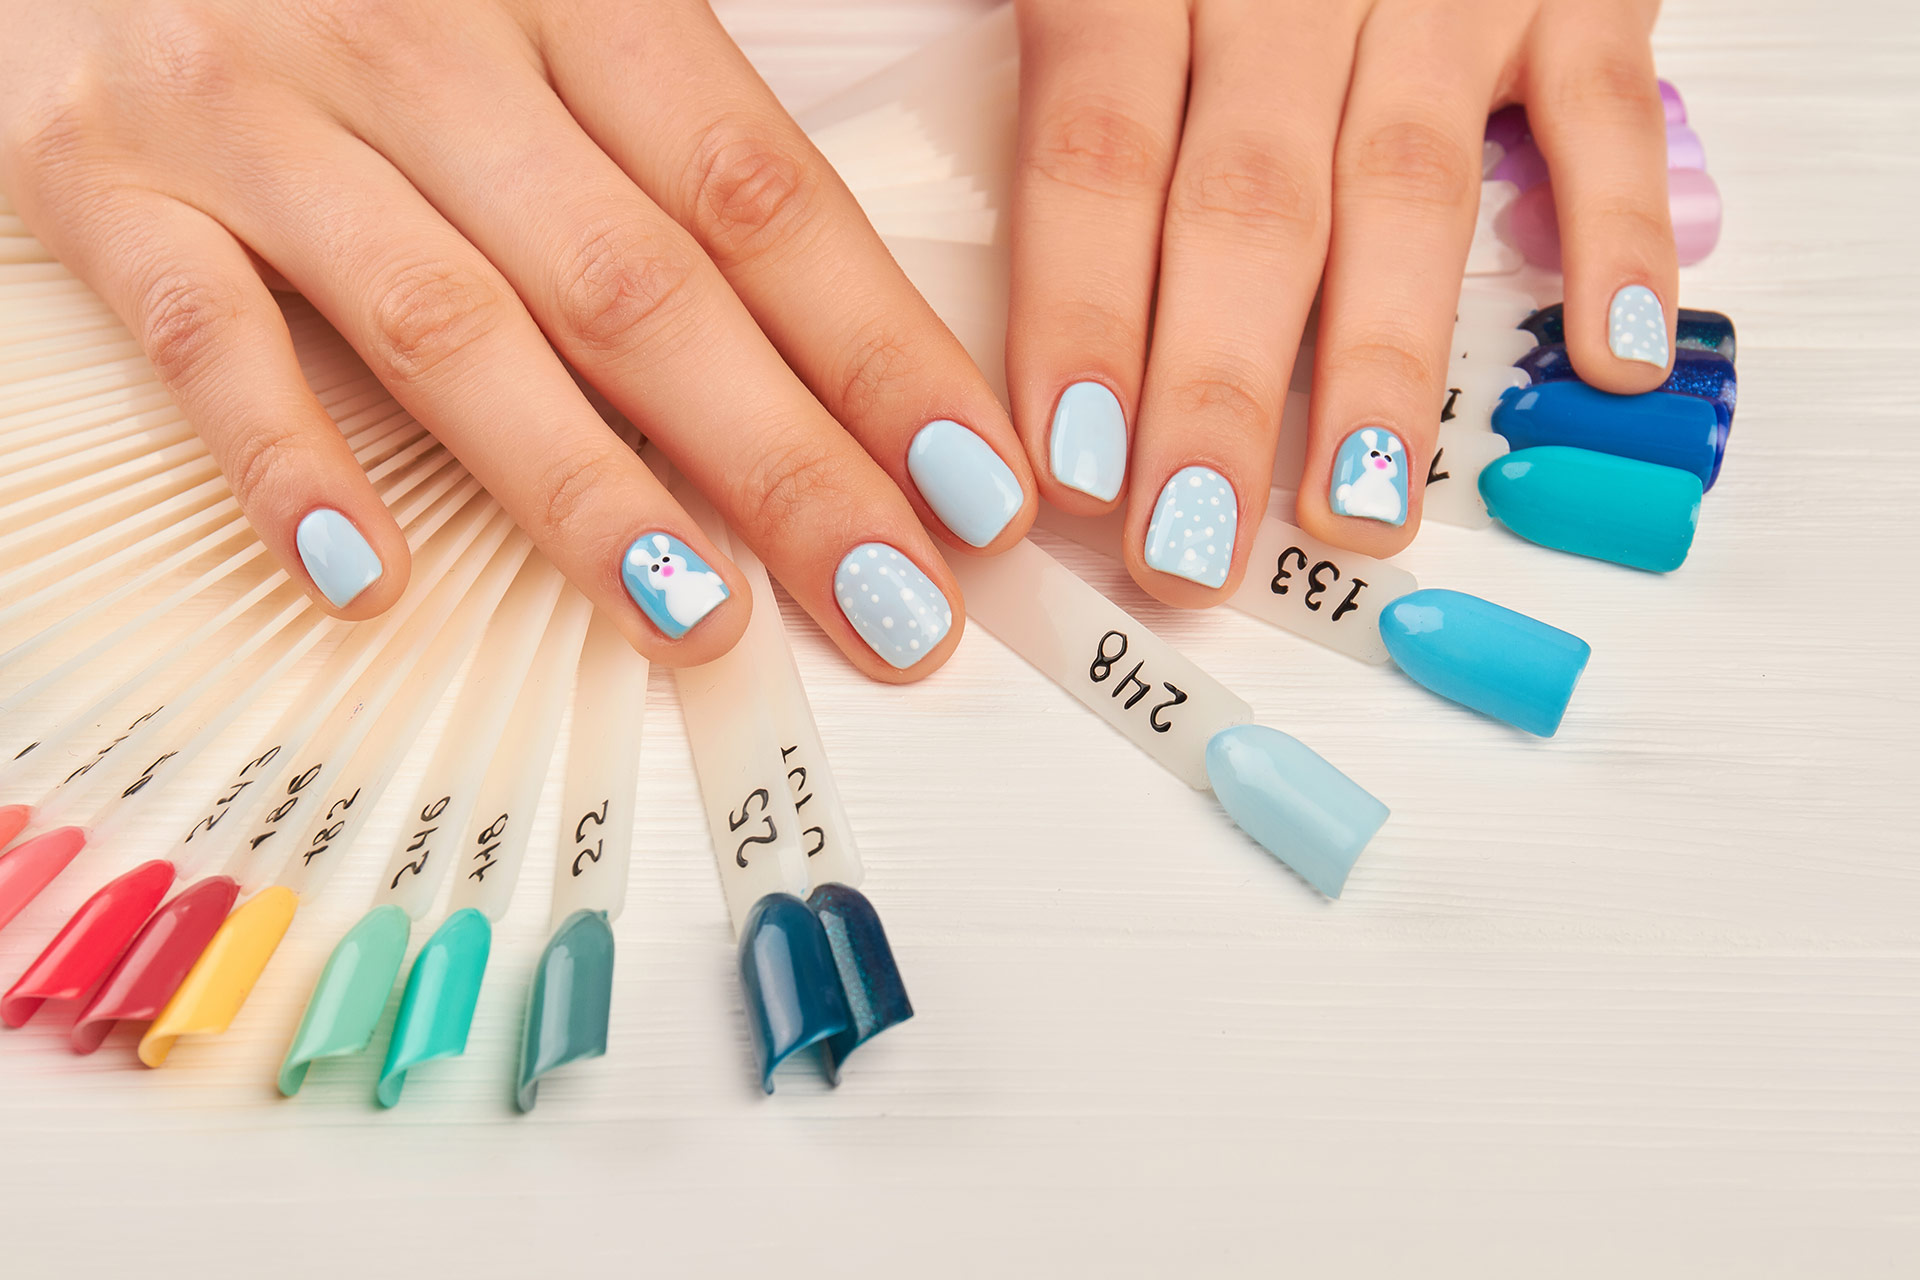 How to Get the Best 3 Types of Manicure at Home